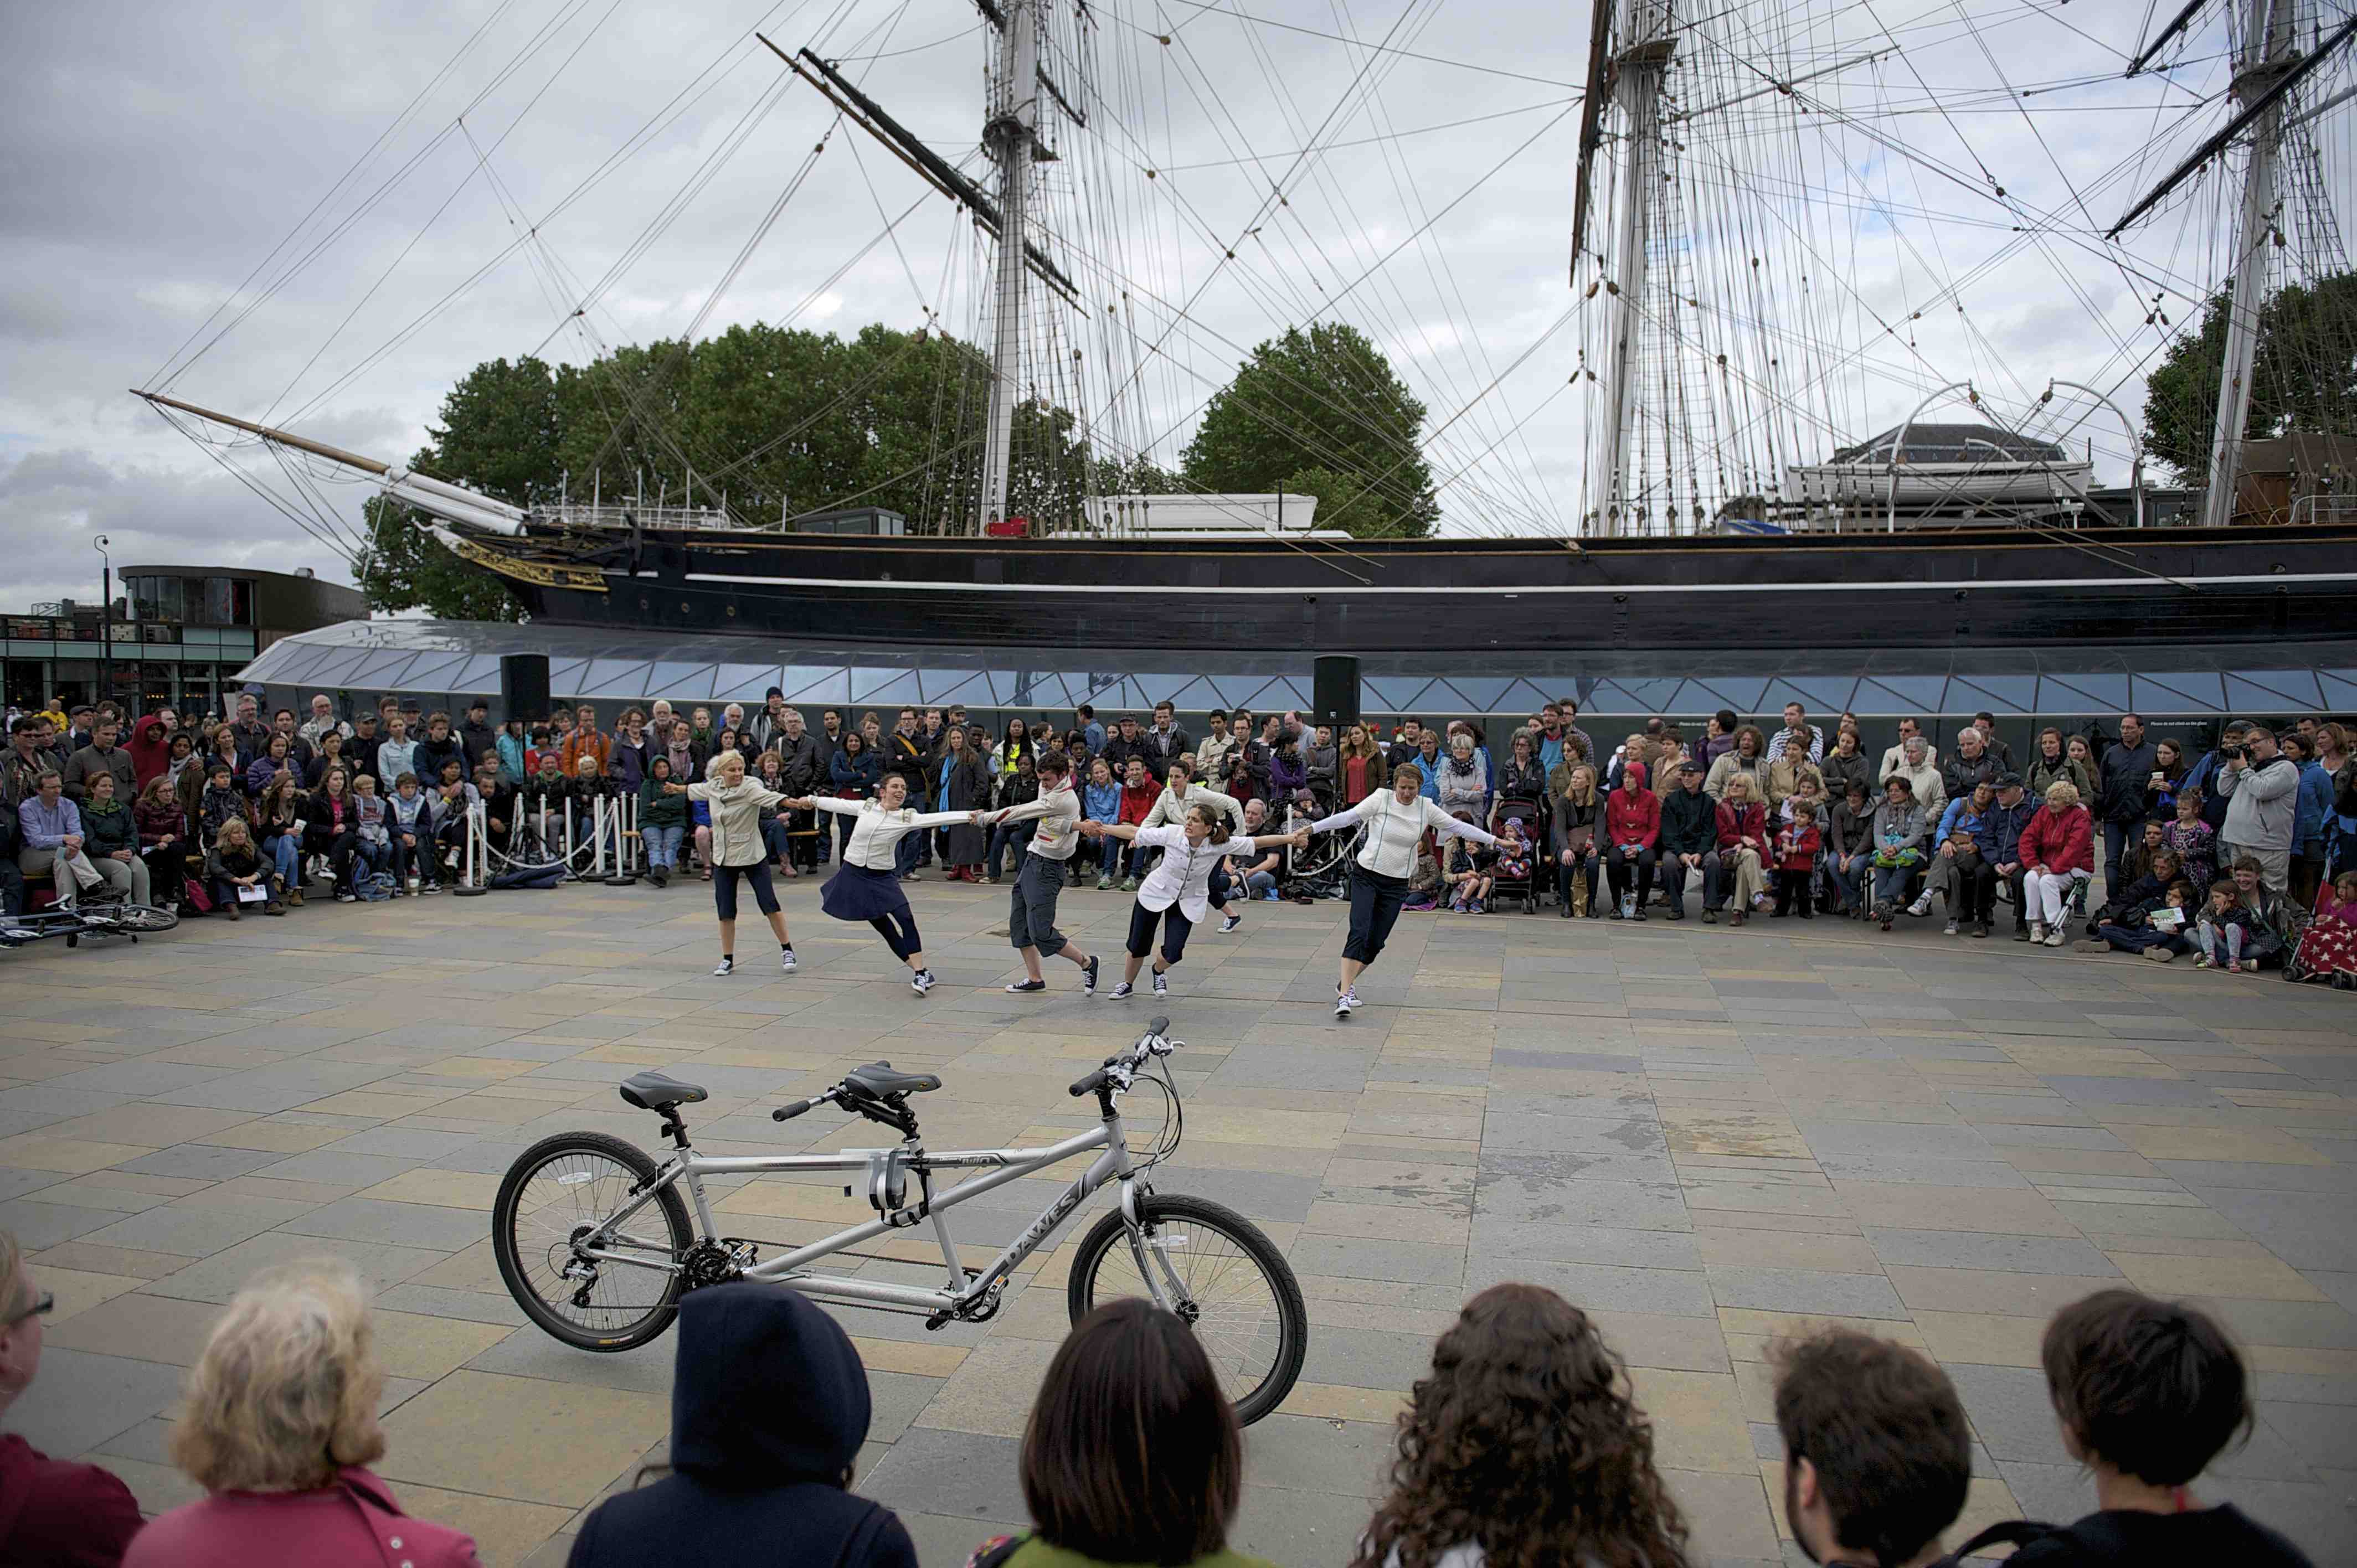 Performers in a line pulling Frustration, surrounded by a large crowd in front of the Cutty Sark